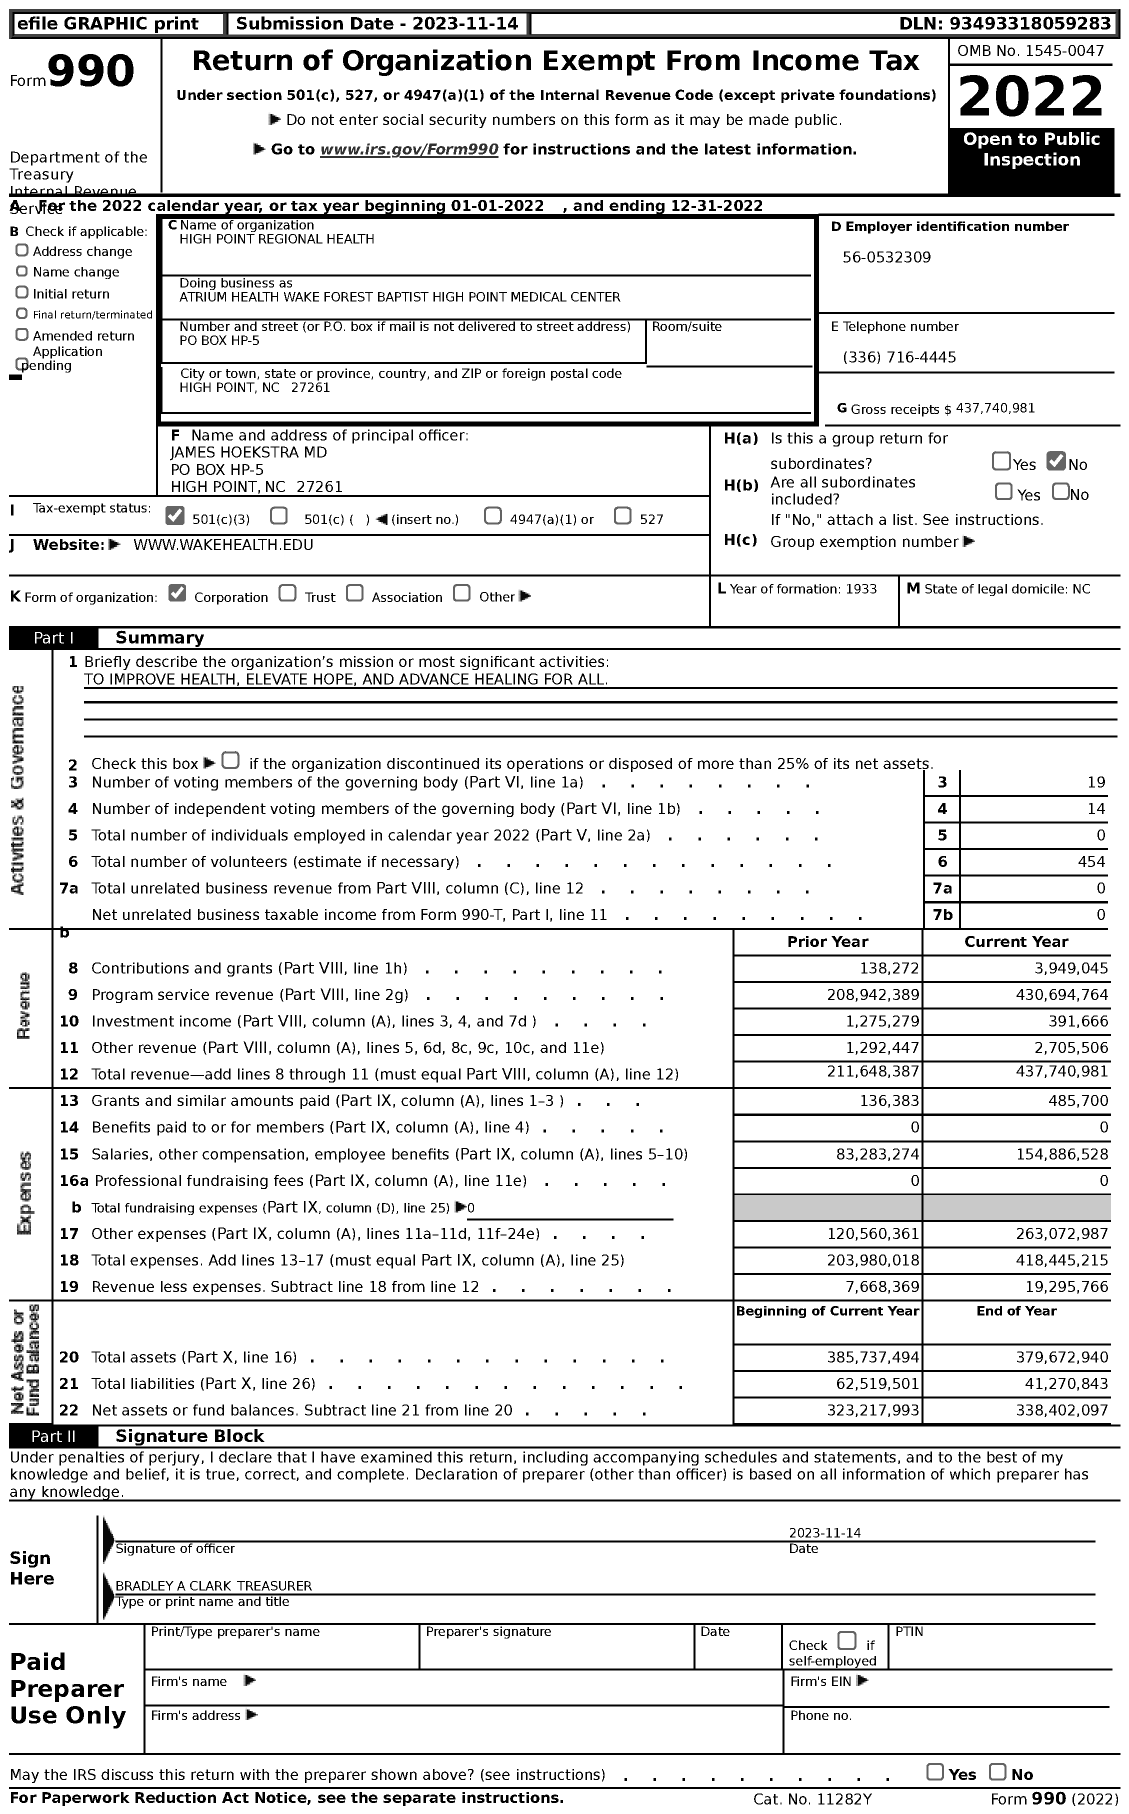 Image of first page of 2022 Form 990 for Atrium Health Wake Forest Baptist High Point Medical Center